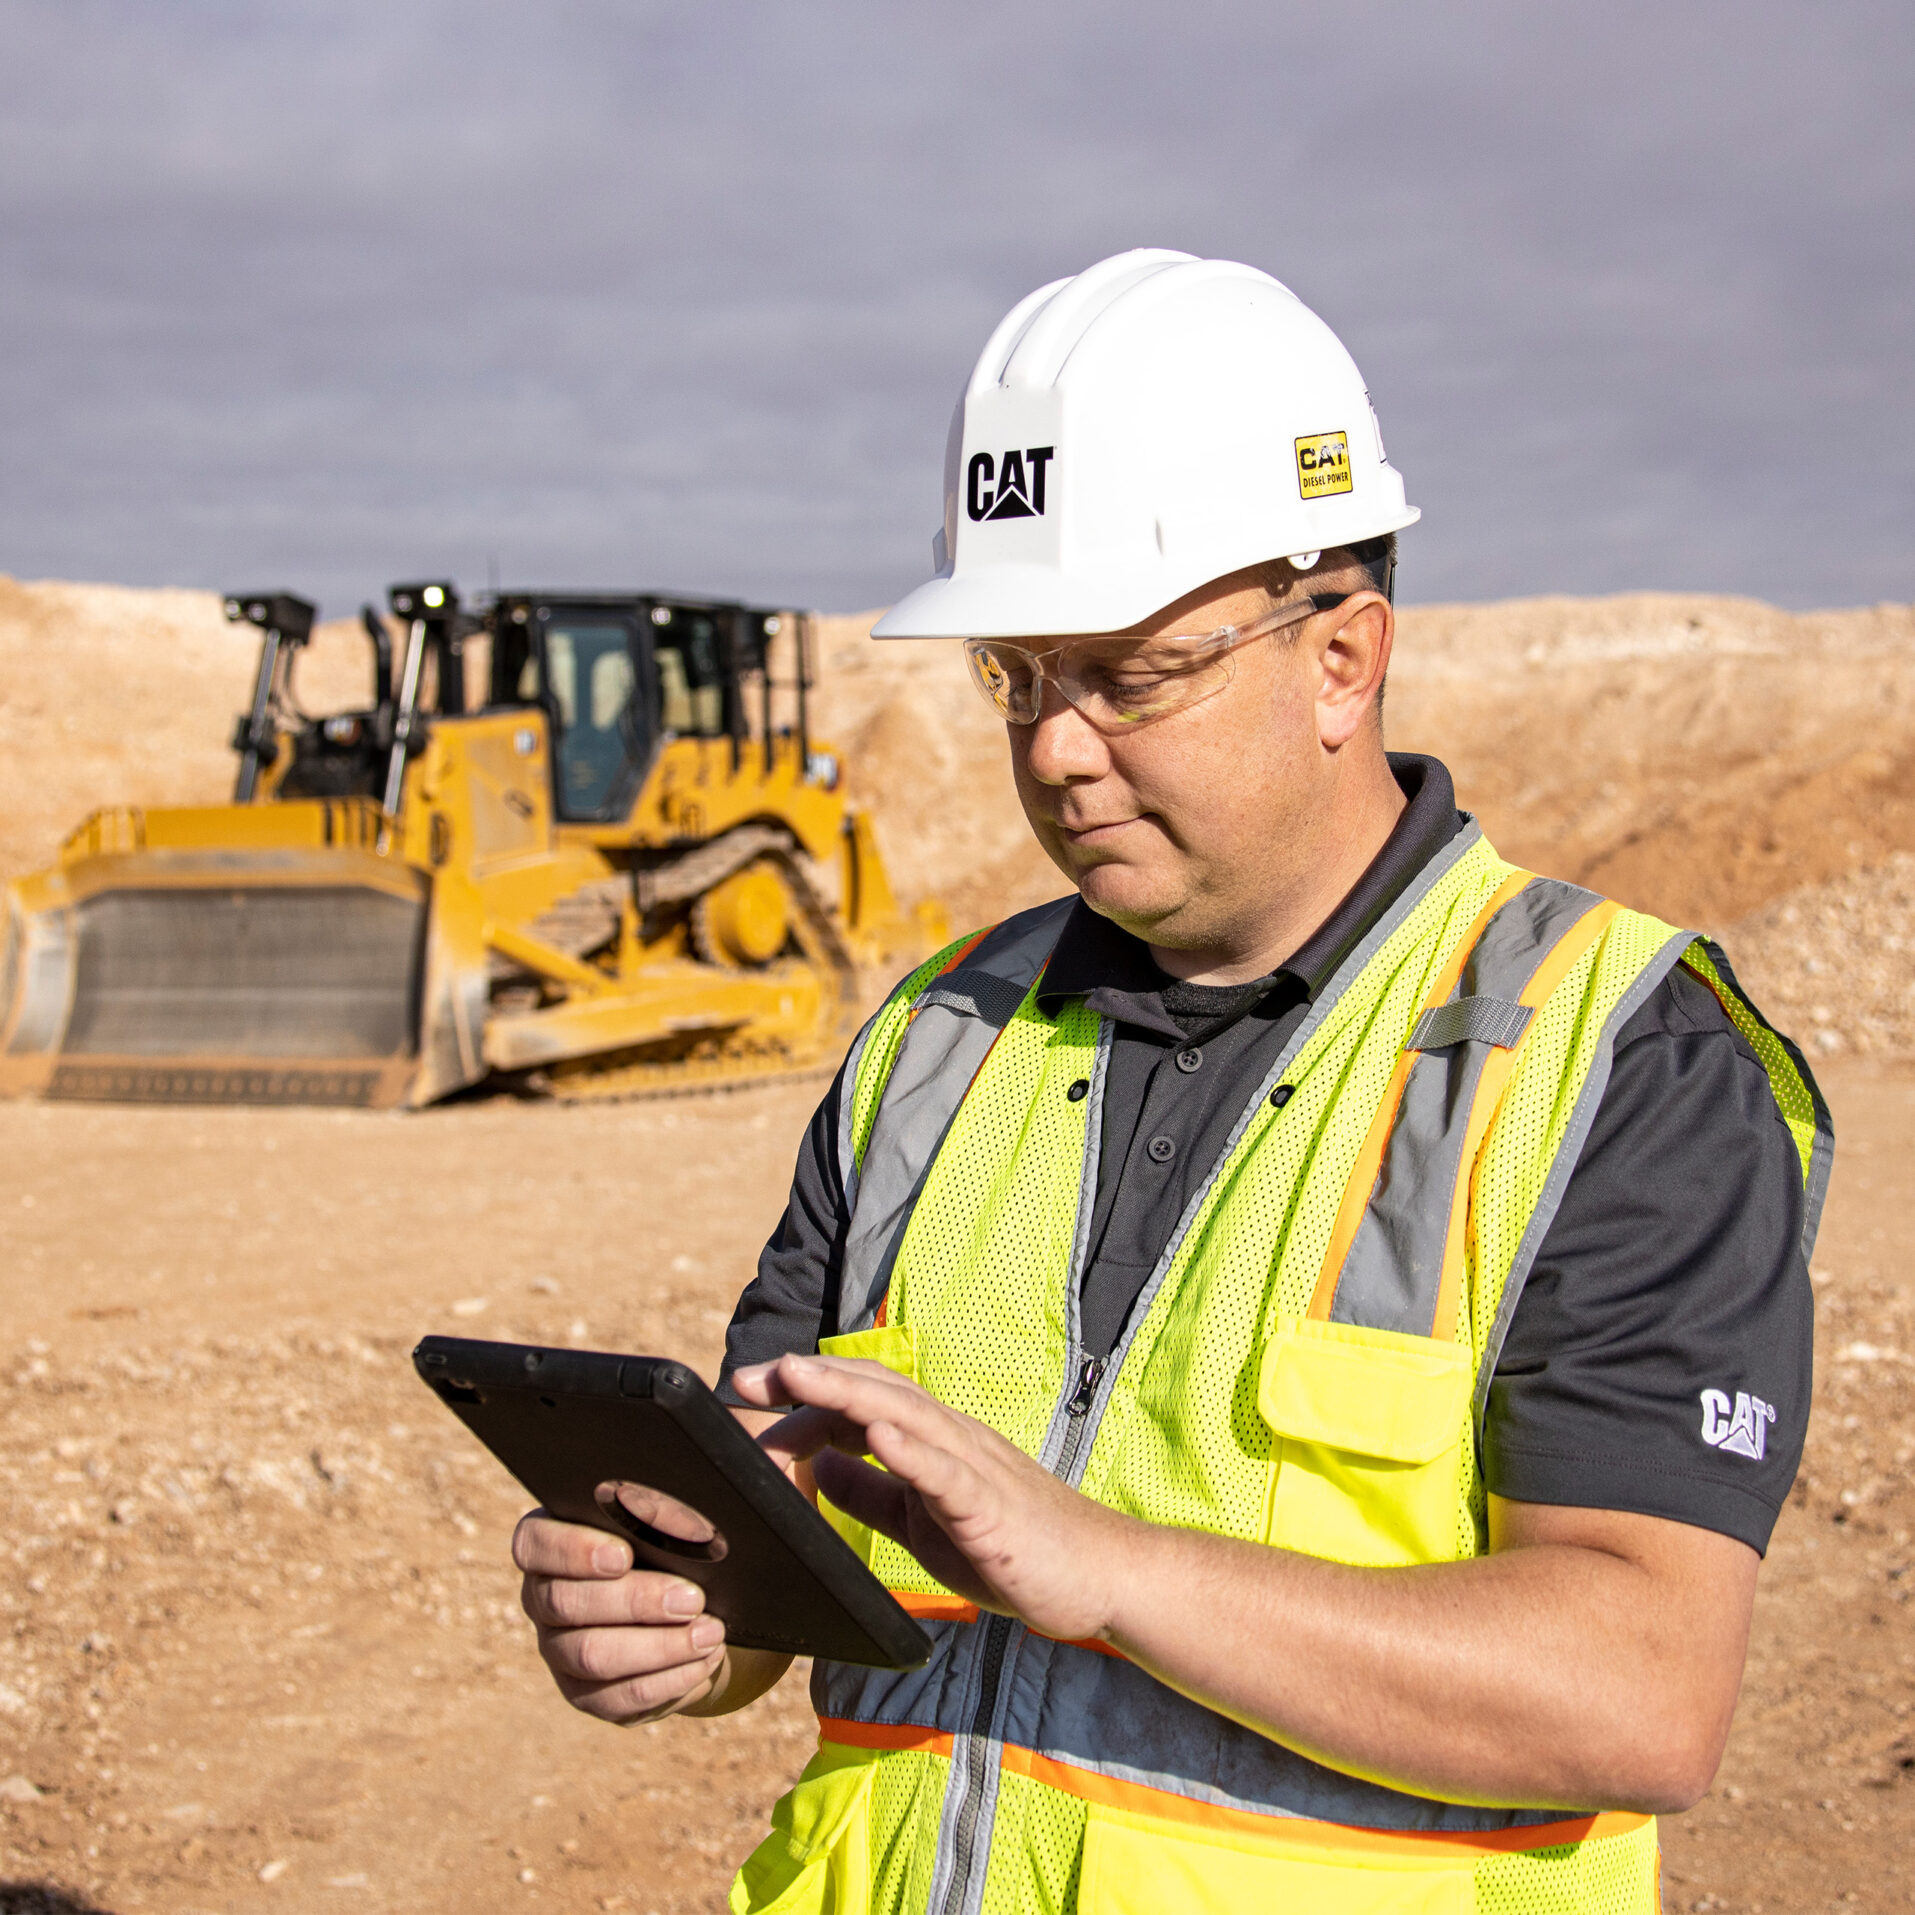 Construction worker in Cat gear using an iPad with heavy equipment in the background